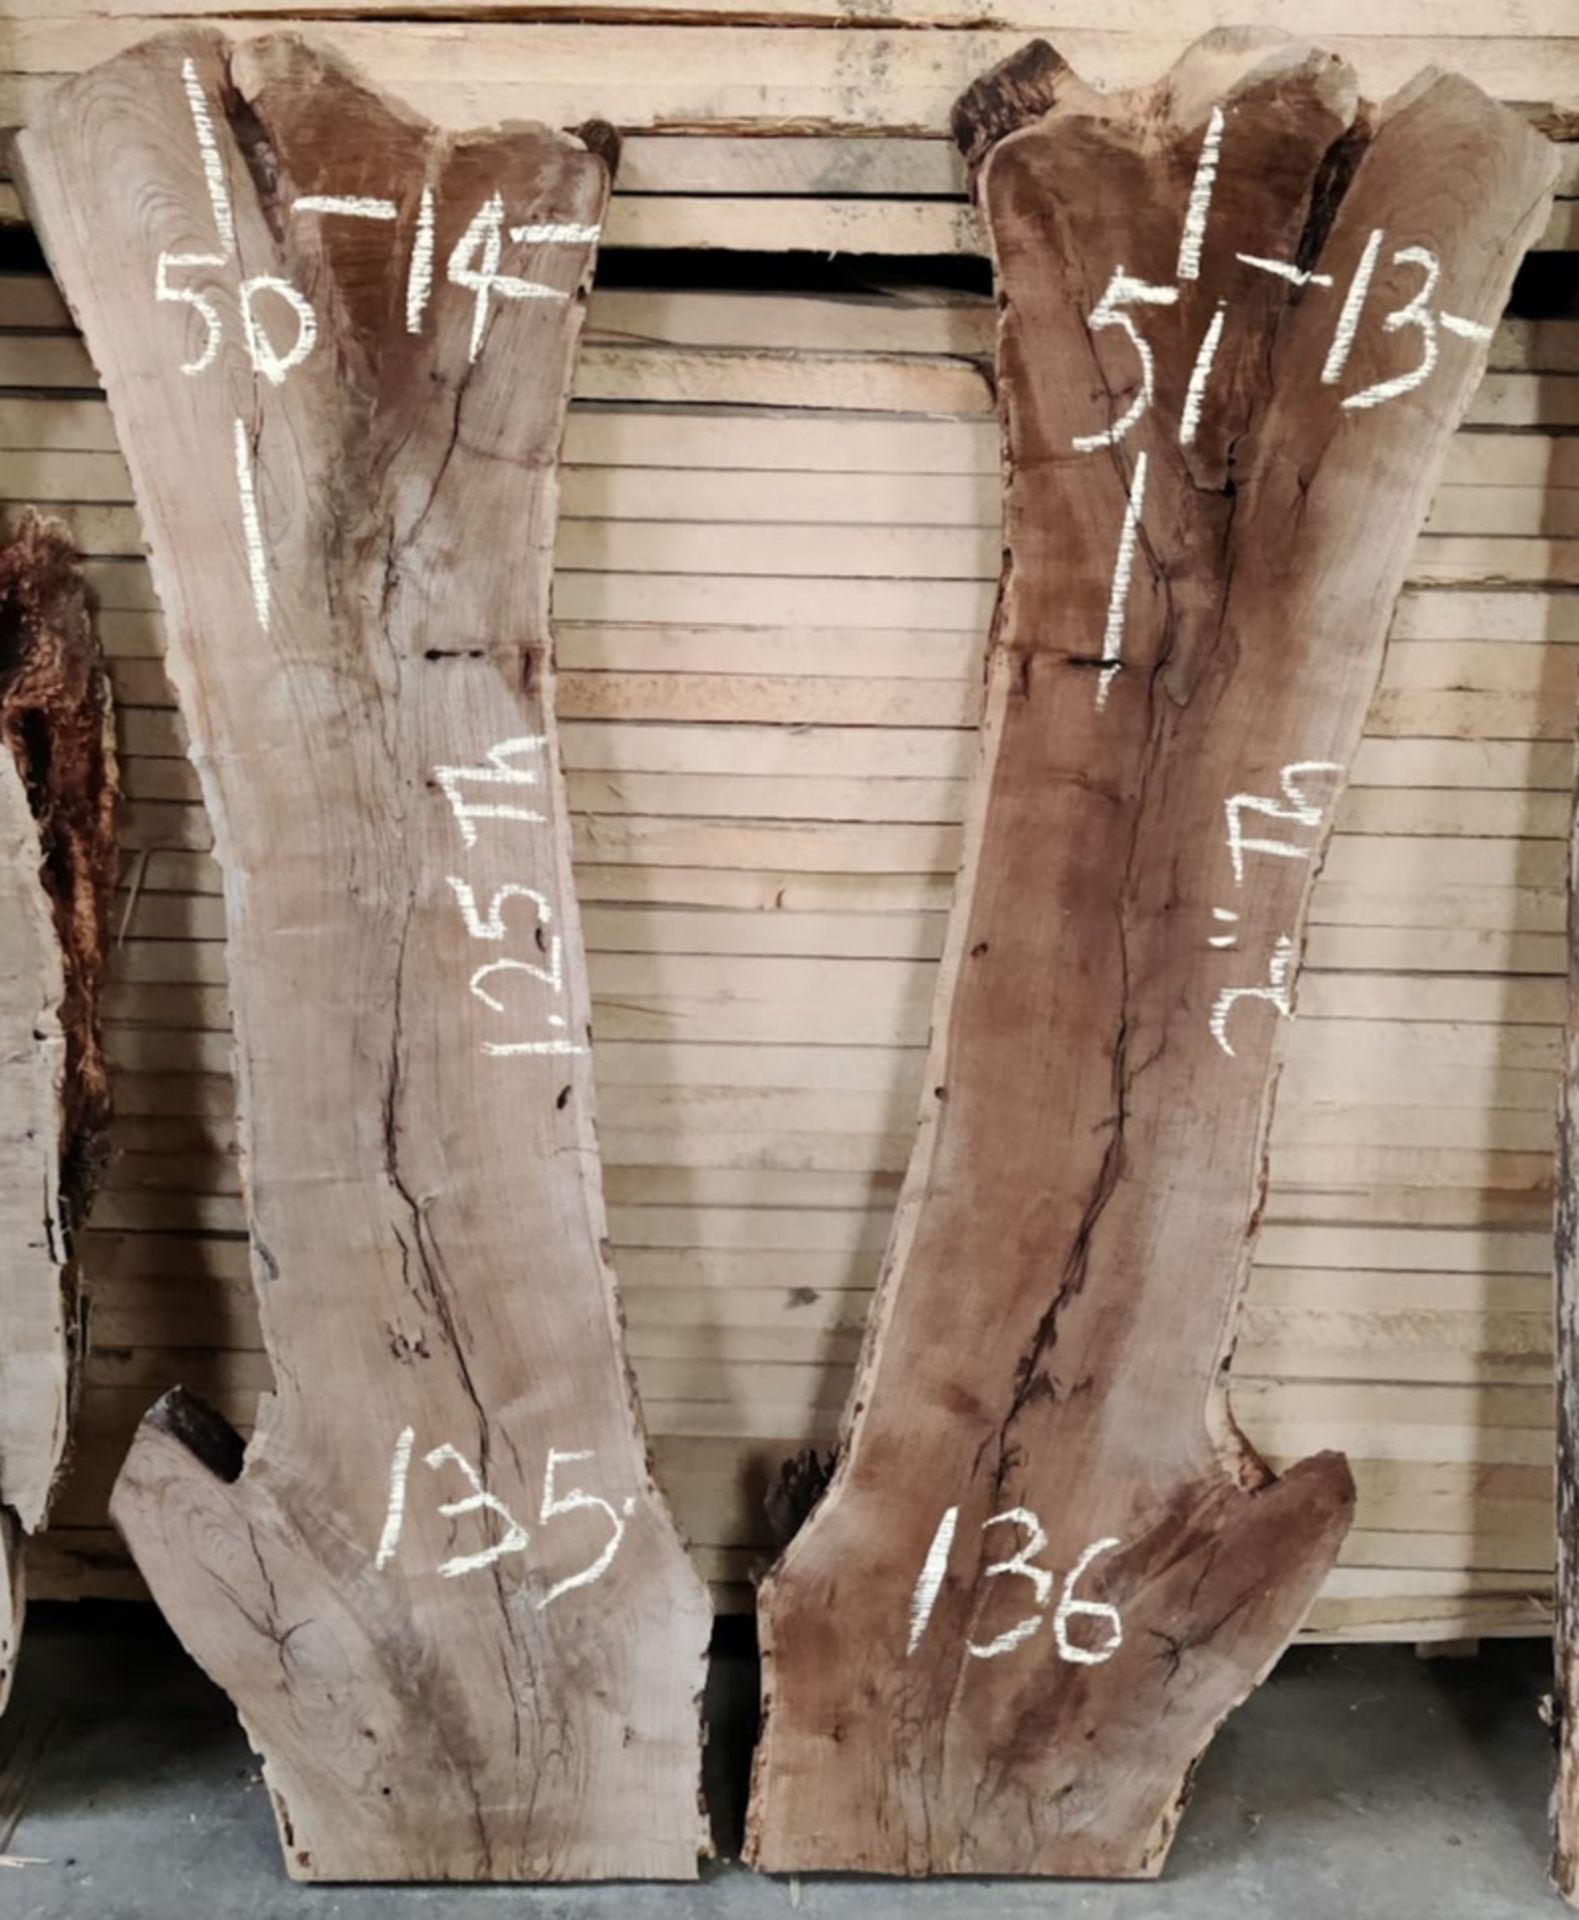 1 - Mesquite Slab, Bookmatch w/Lot 136 - Image 2 of 2